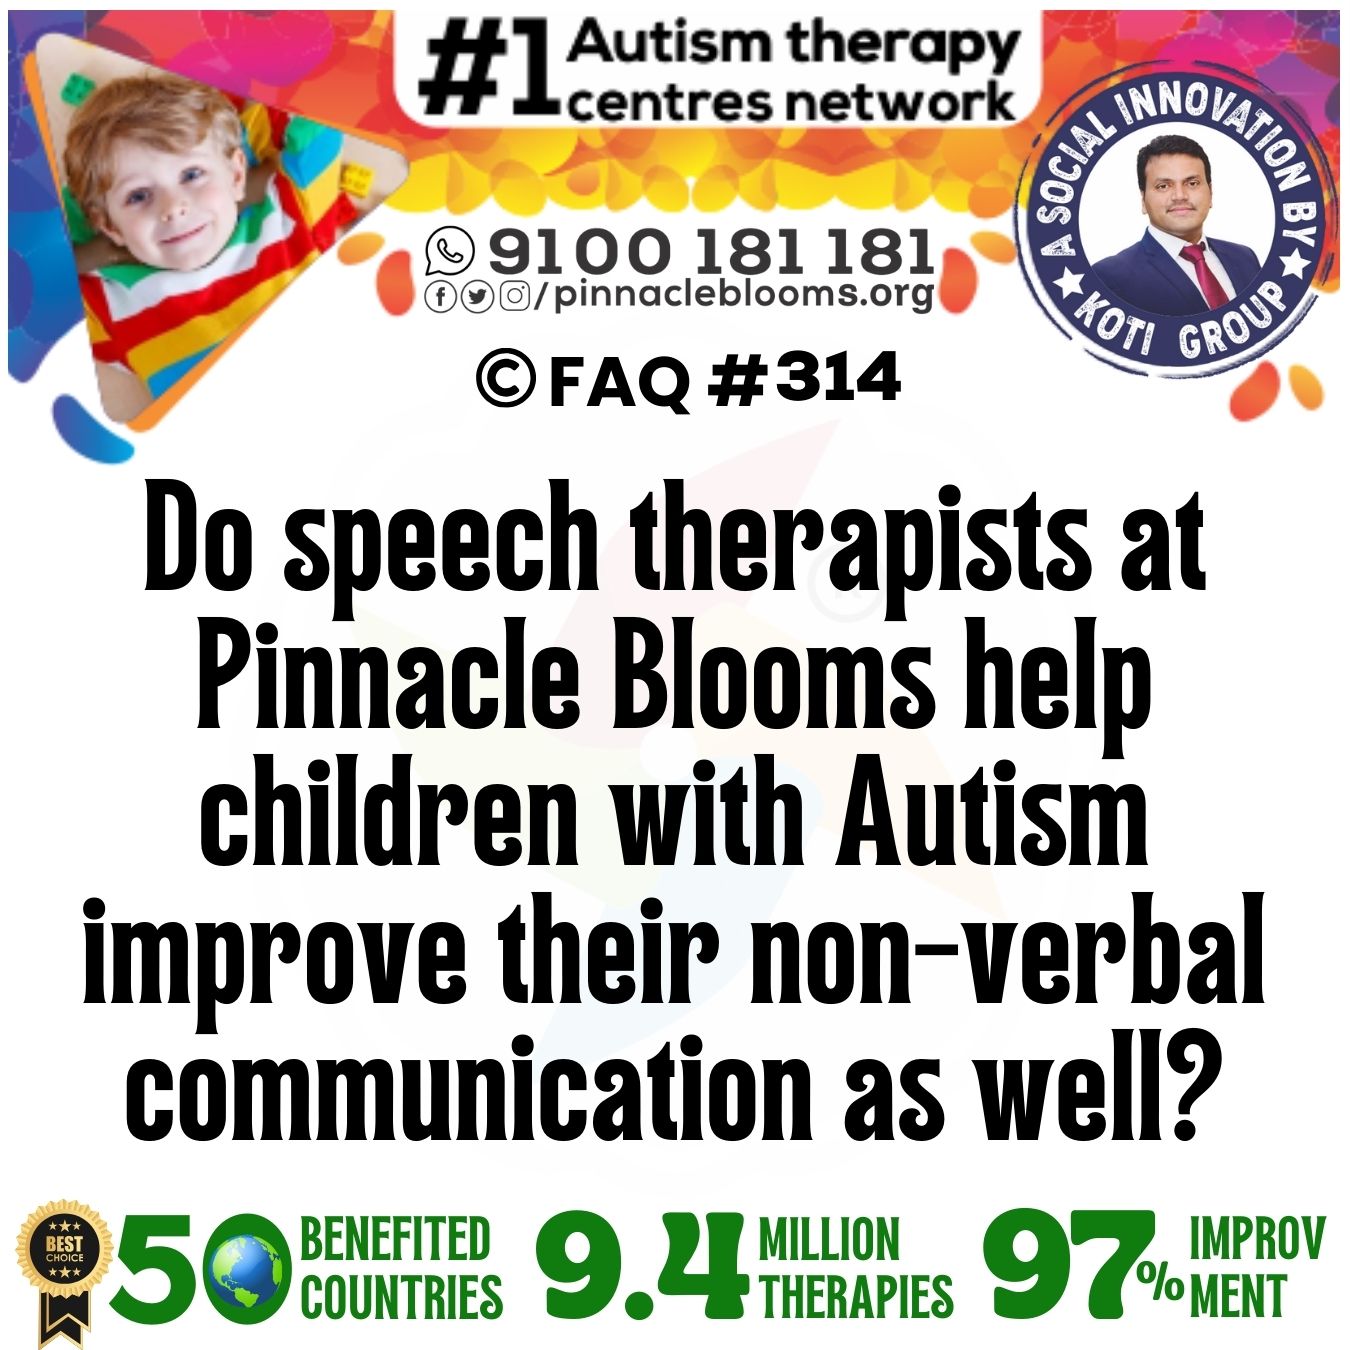 Do speech therapists at Pinnacle Blooms help children with Autism improve their non-verbal communication as well?